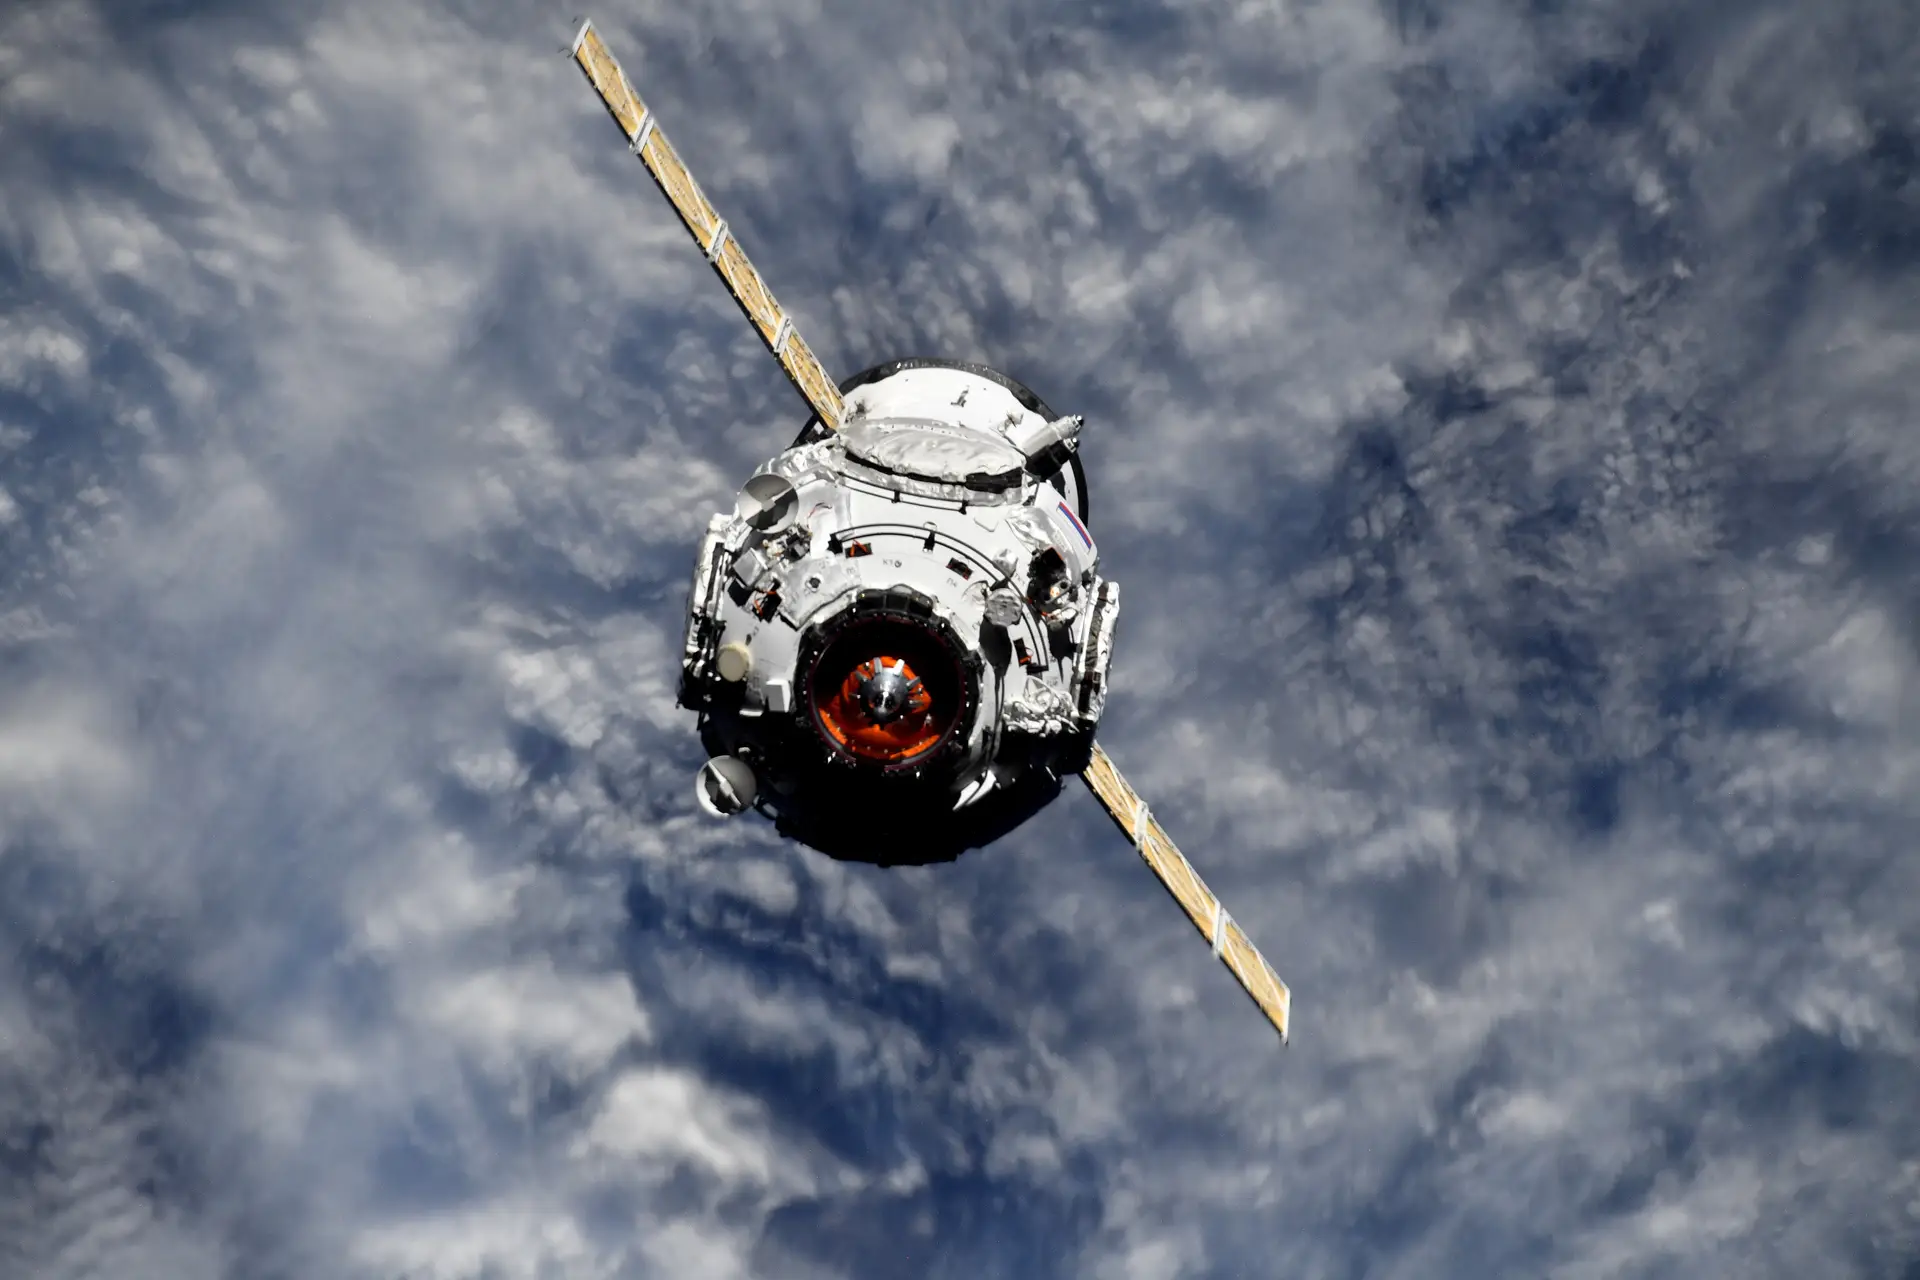 On Friday, November 26, astronauts aboard the International Space Station received the Russian Perishal module, which will provide additional docking ports for the Soyuz and Progress spacecraft.  Russian astronauts Anton Shkaplerov and Pyotr Dubrov supervised the docking process, and Matthias Maurer took photos.